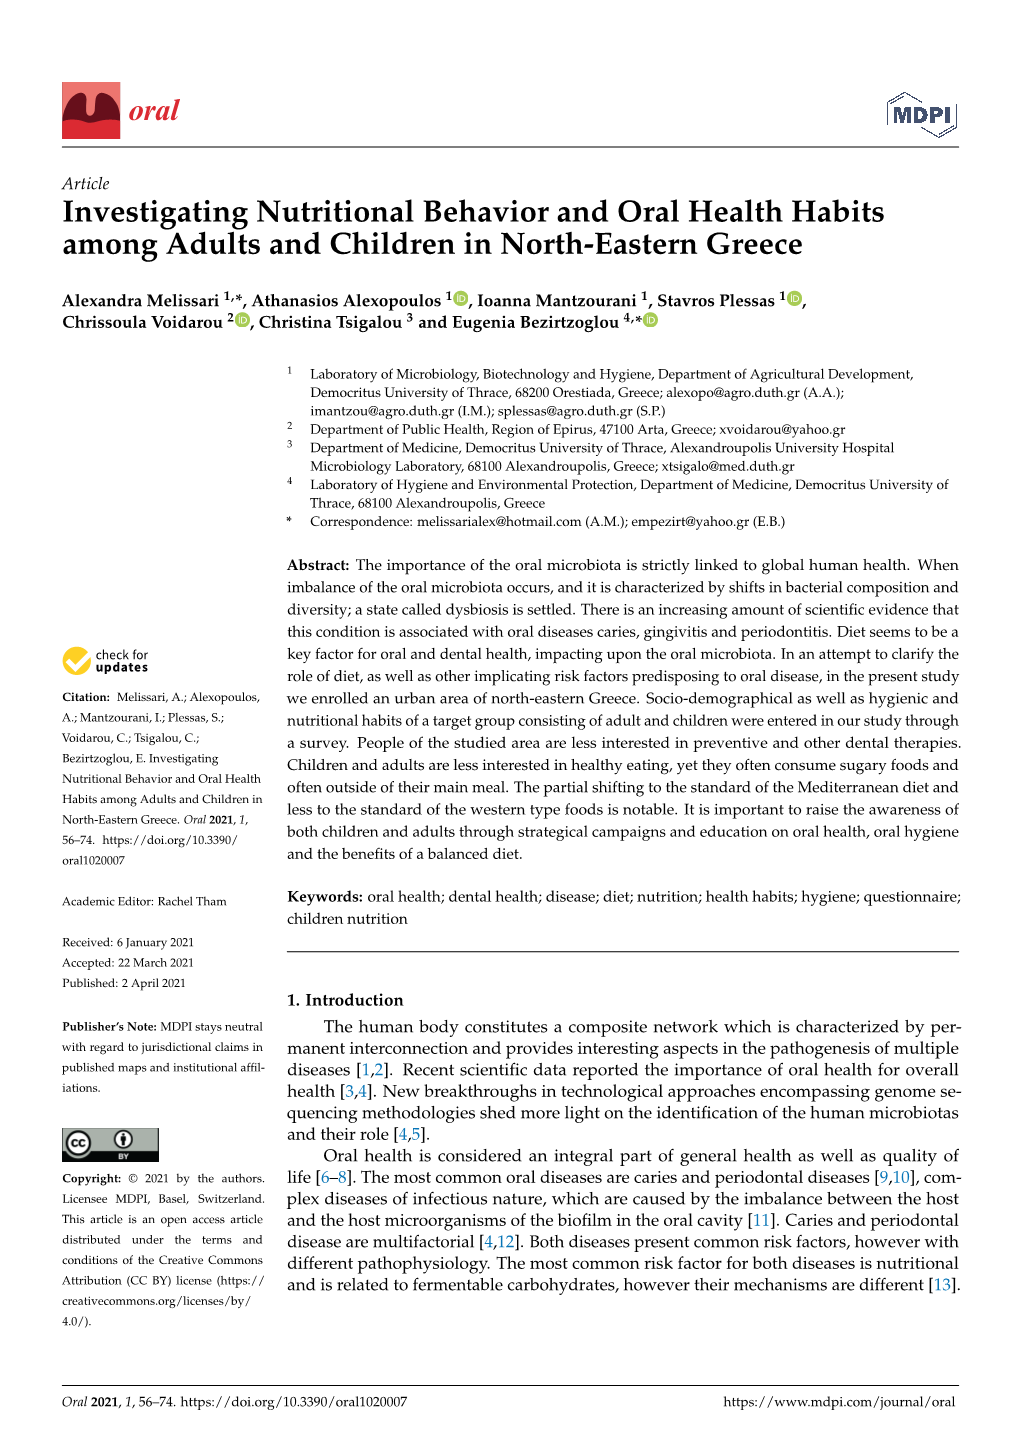 Investigating Nutritional Behavior and Oral Health Habits Among Adults and Children in North-Eastern Greece